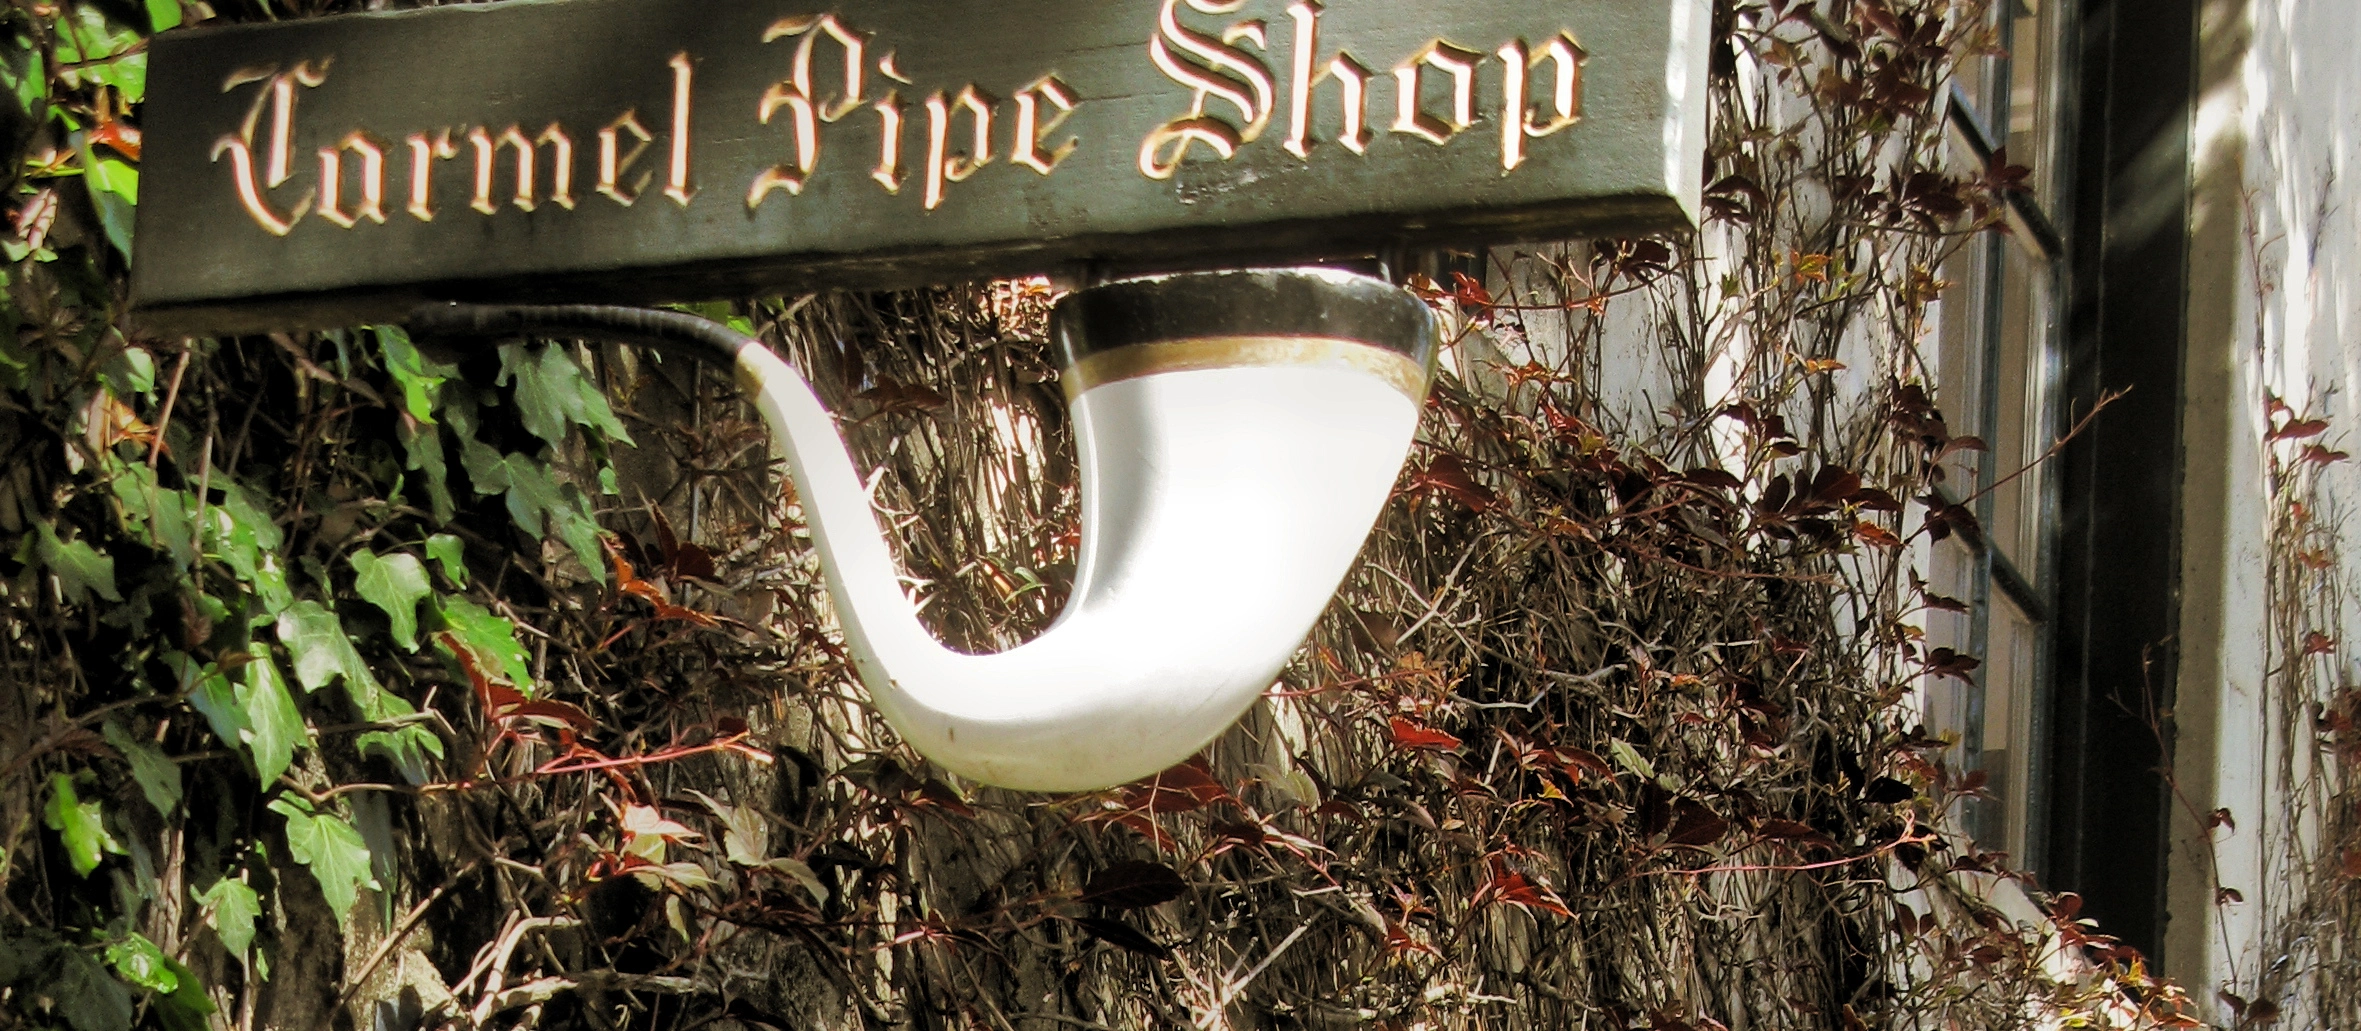 Carmel Pipe Shop in USA, north_america | Tobacco Products - Country Helper